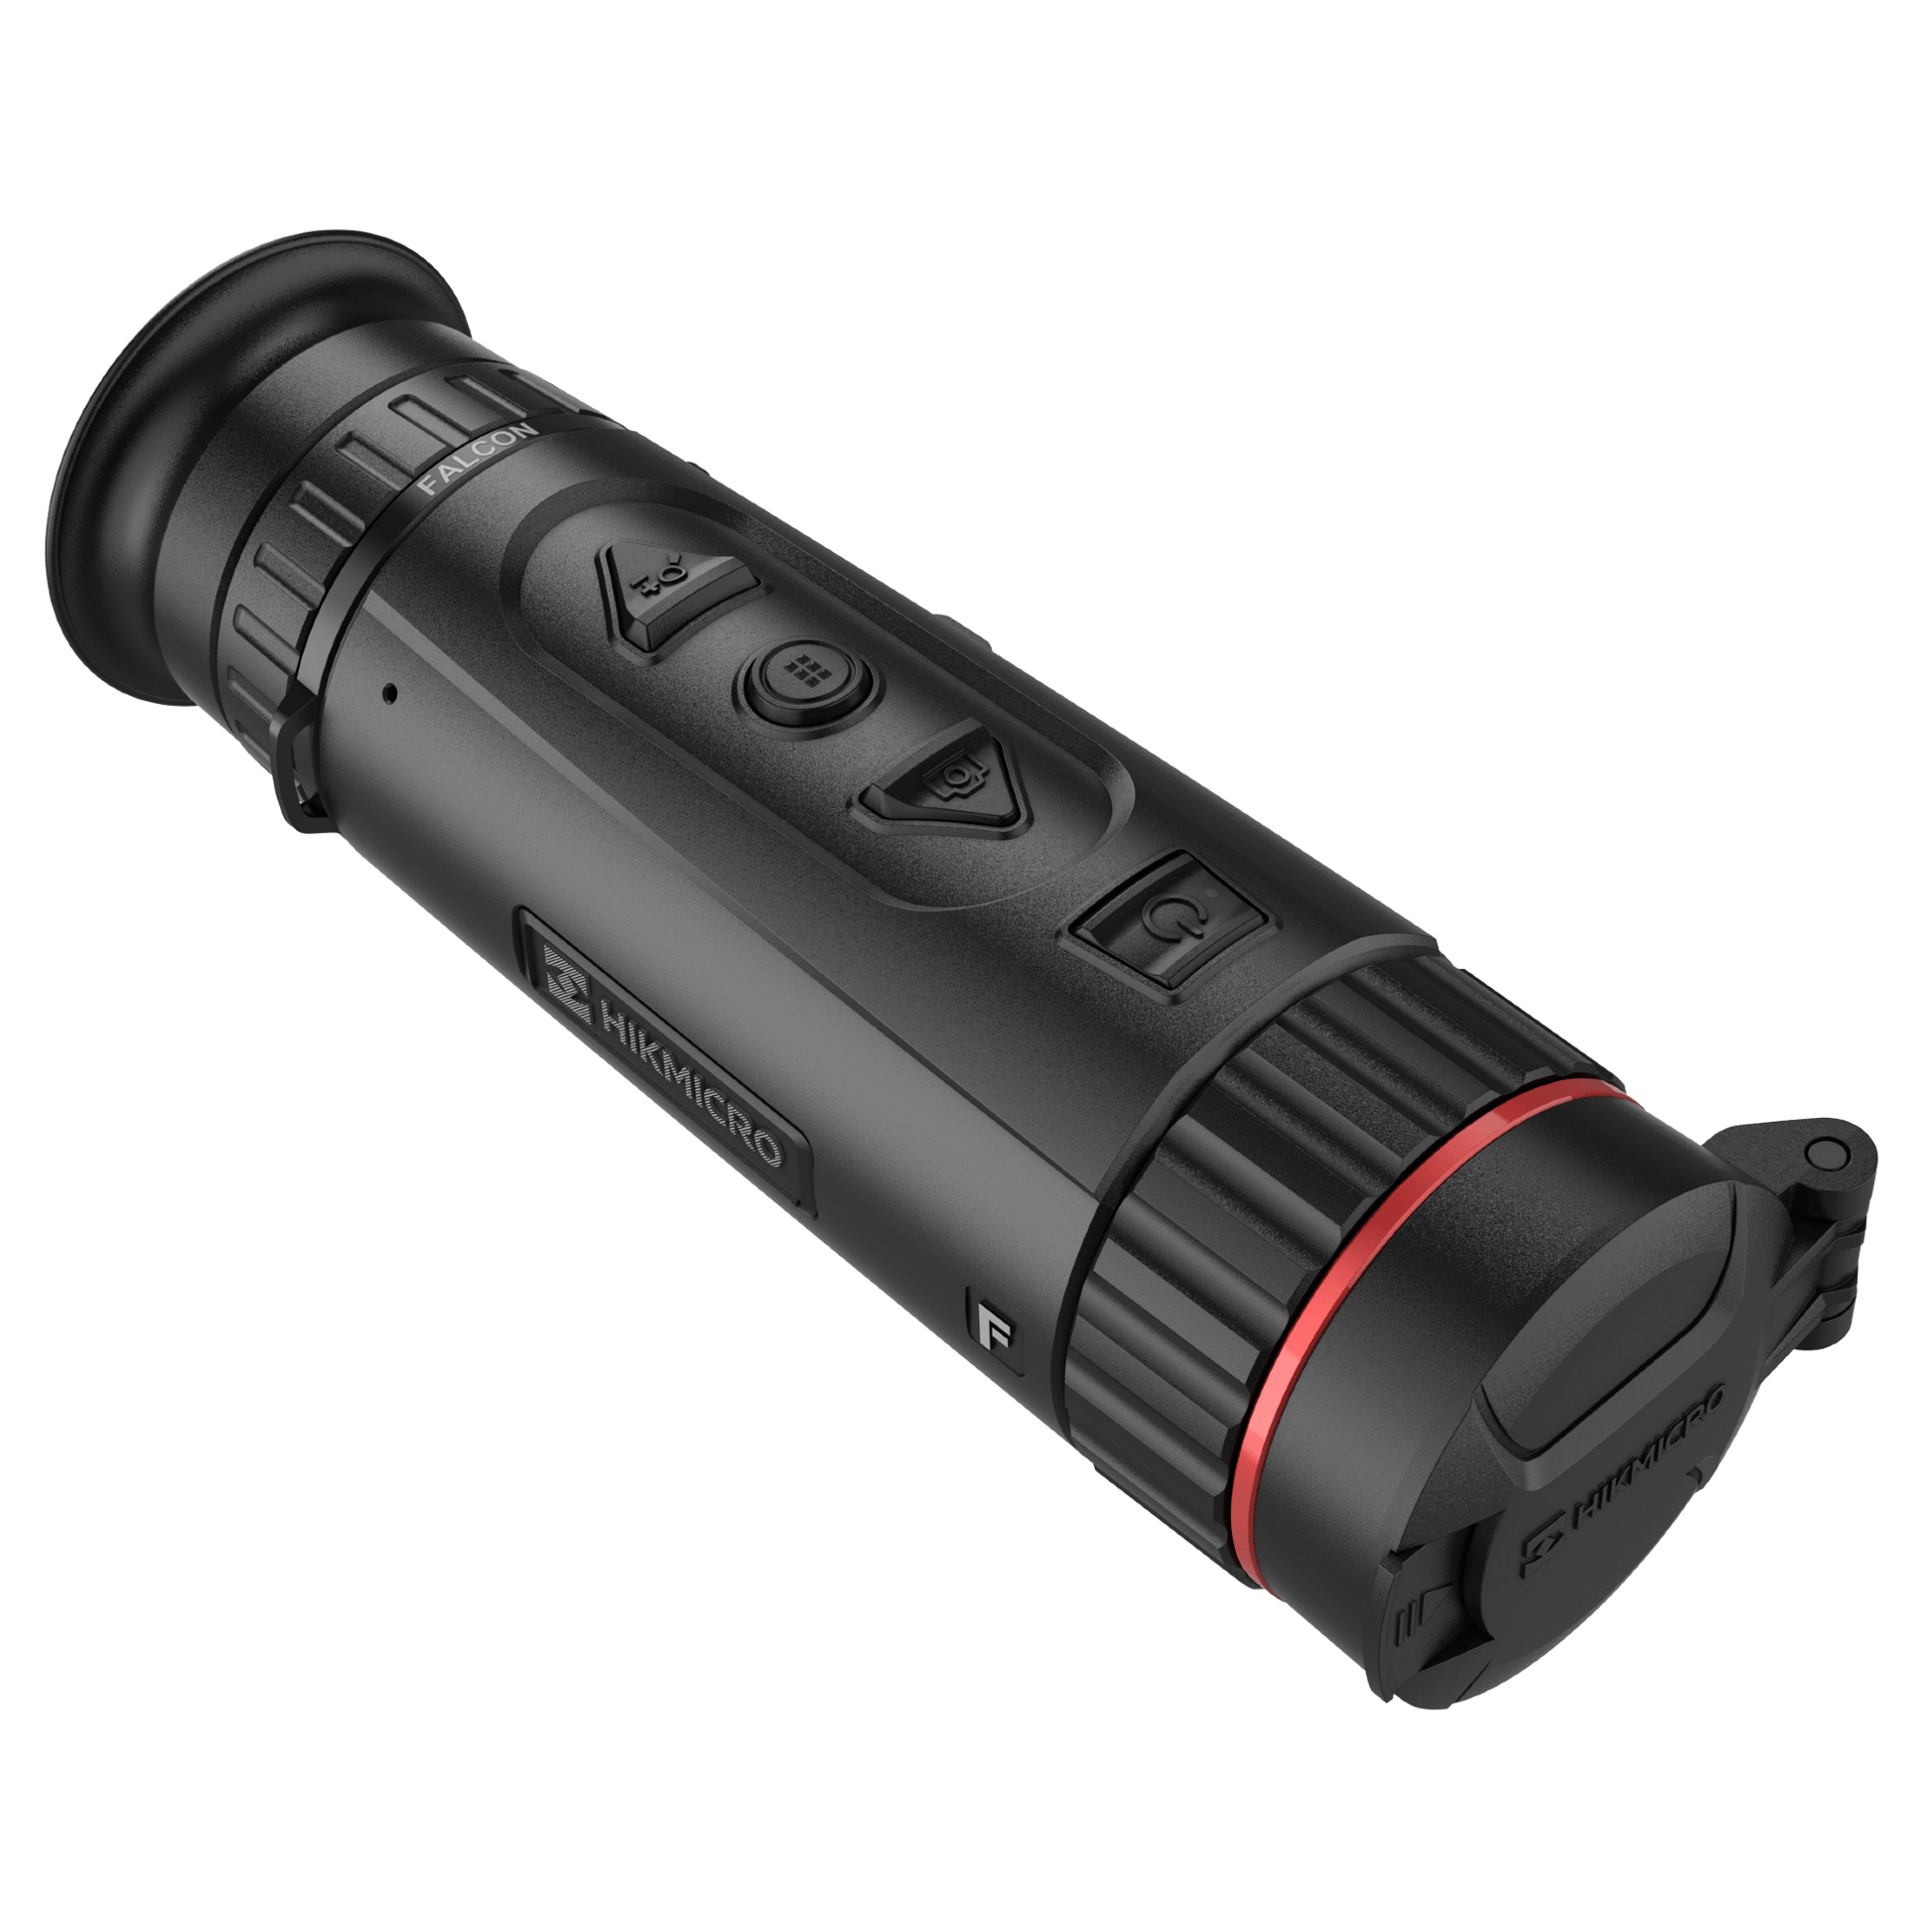 HikMicro Thermal Imaging Monocular for Sale - HikMicro Falcon Series FH25 - HM-TS43-25XG_W-FH25 - Front Right View from Top